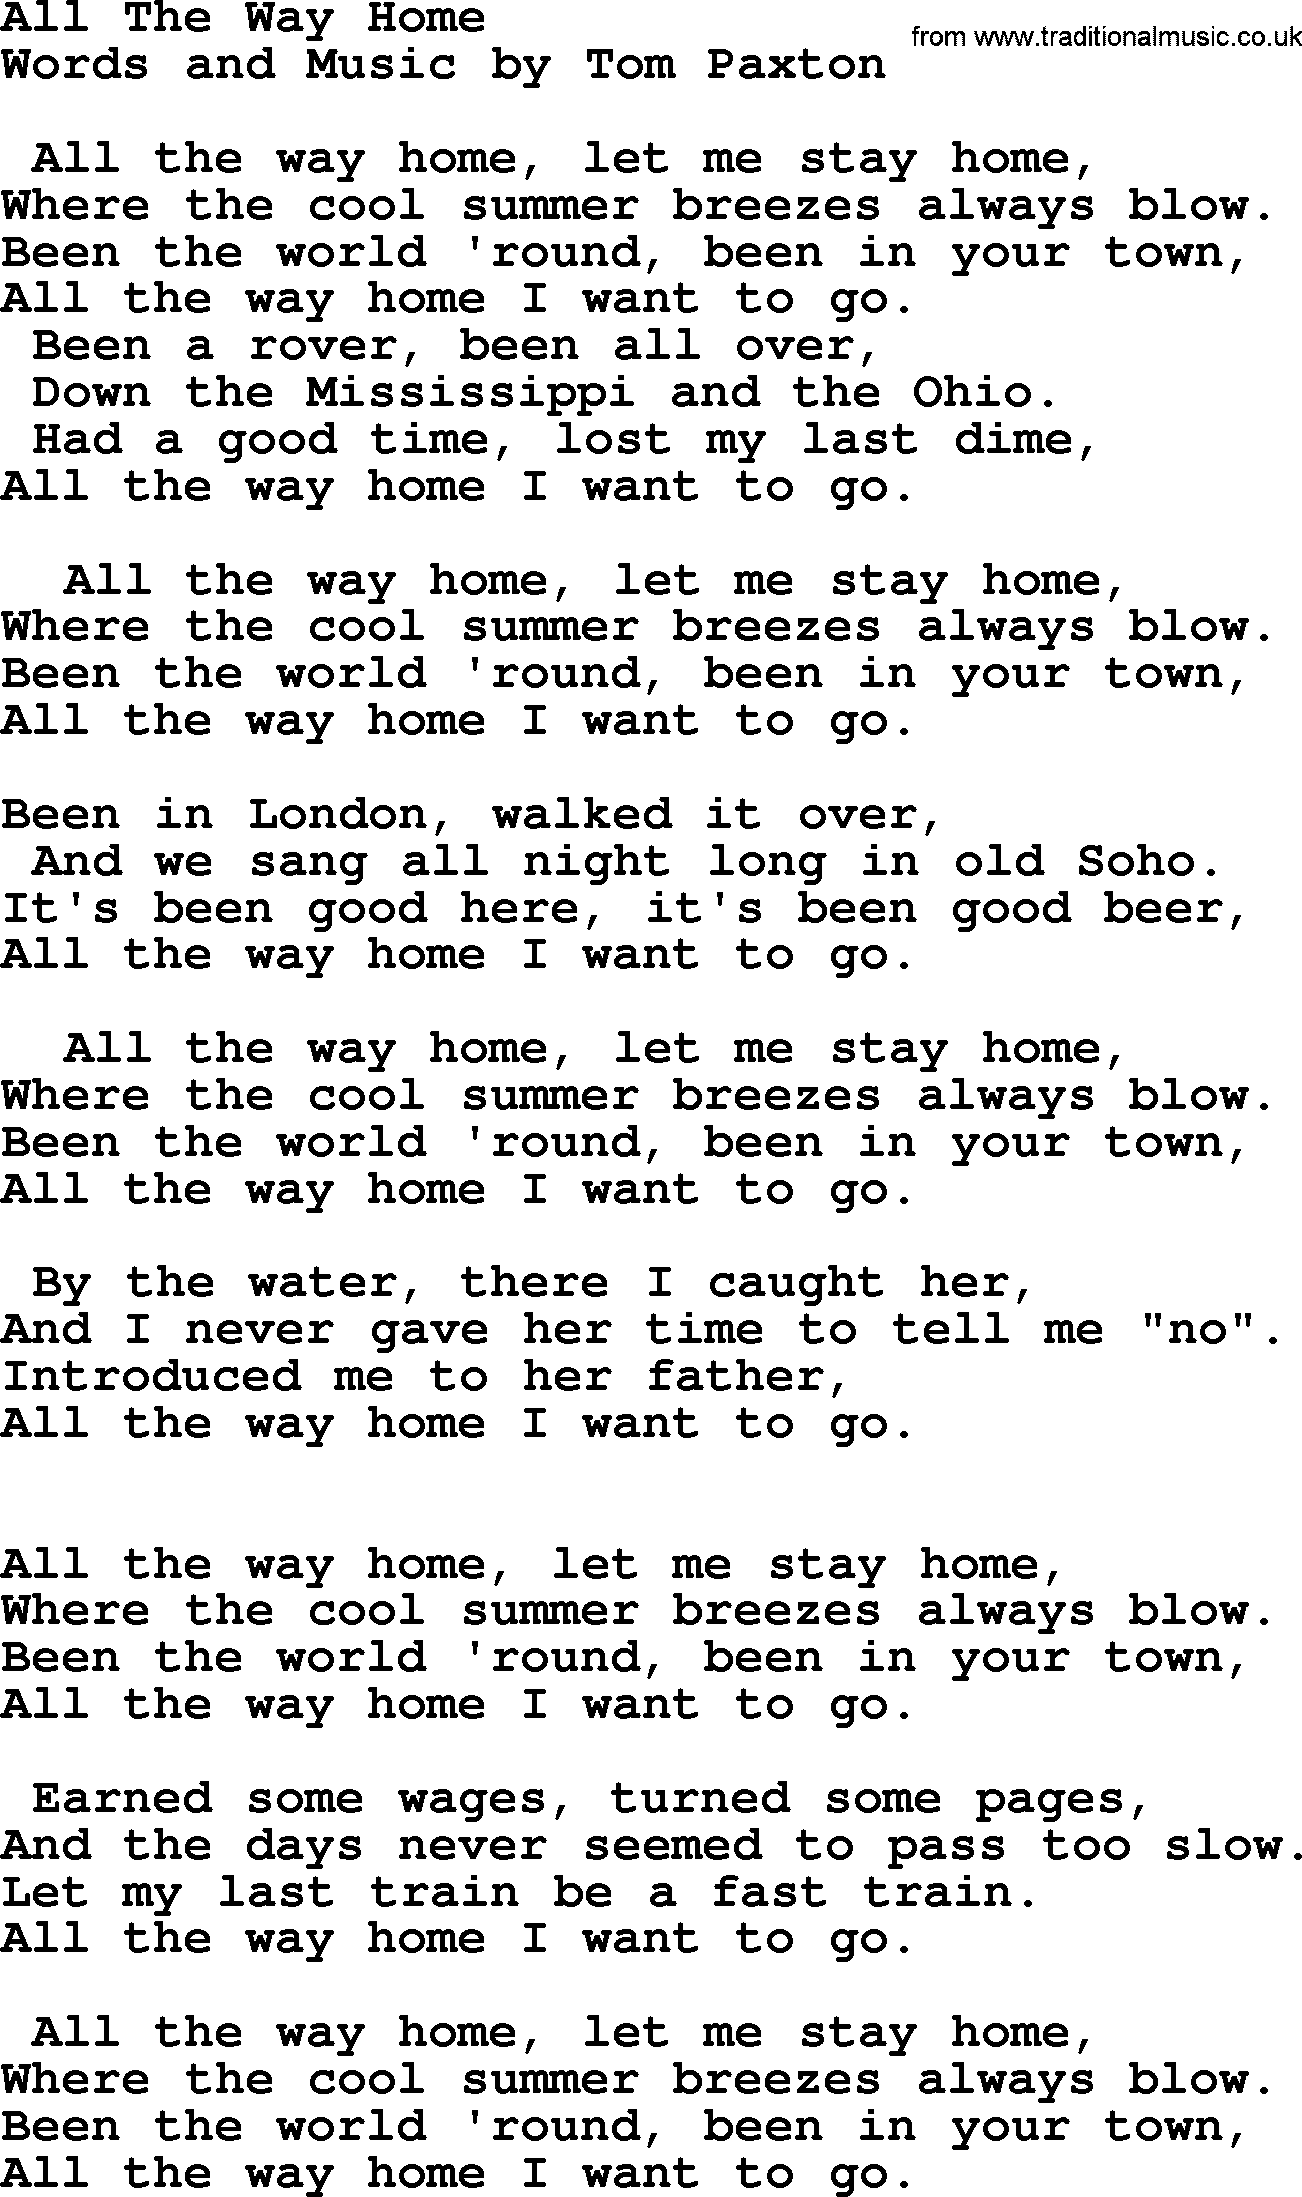 Tom Paxton song: All The Way Home, lyrics